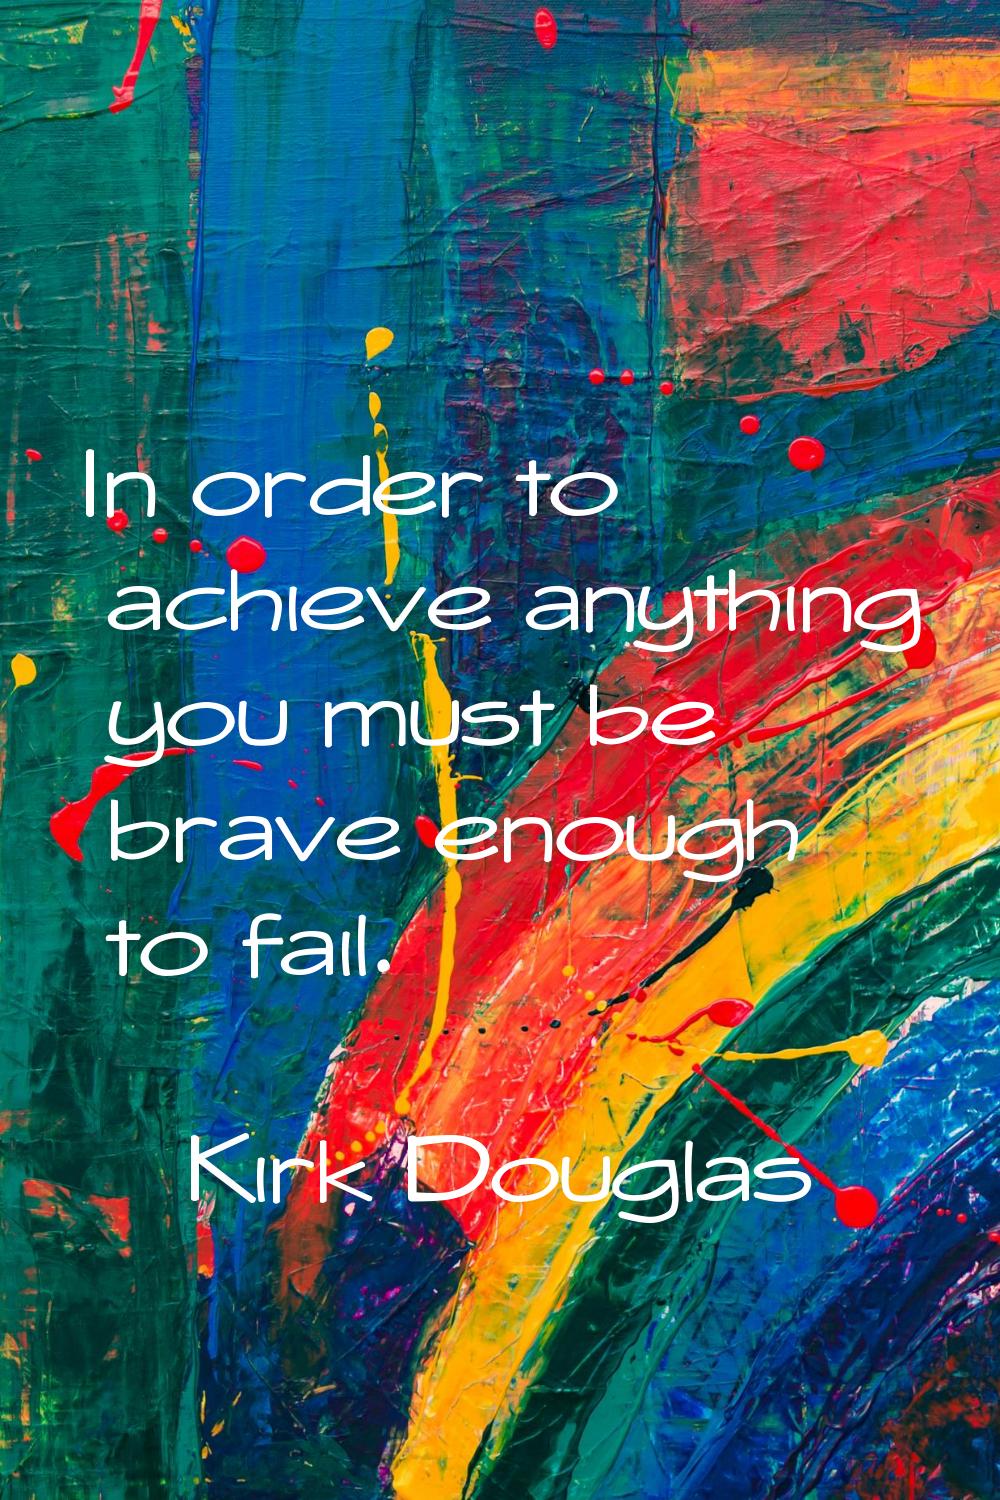 In order to achieve anything you must be brave enough to fail.